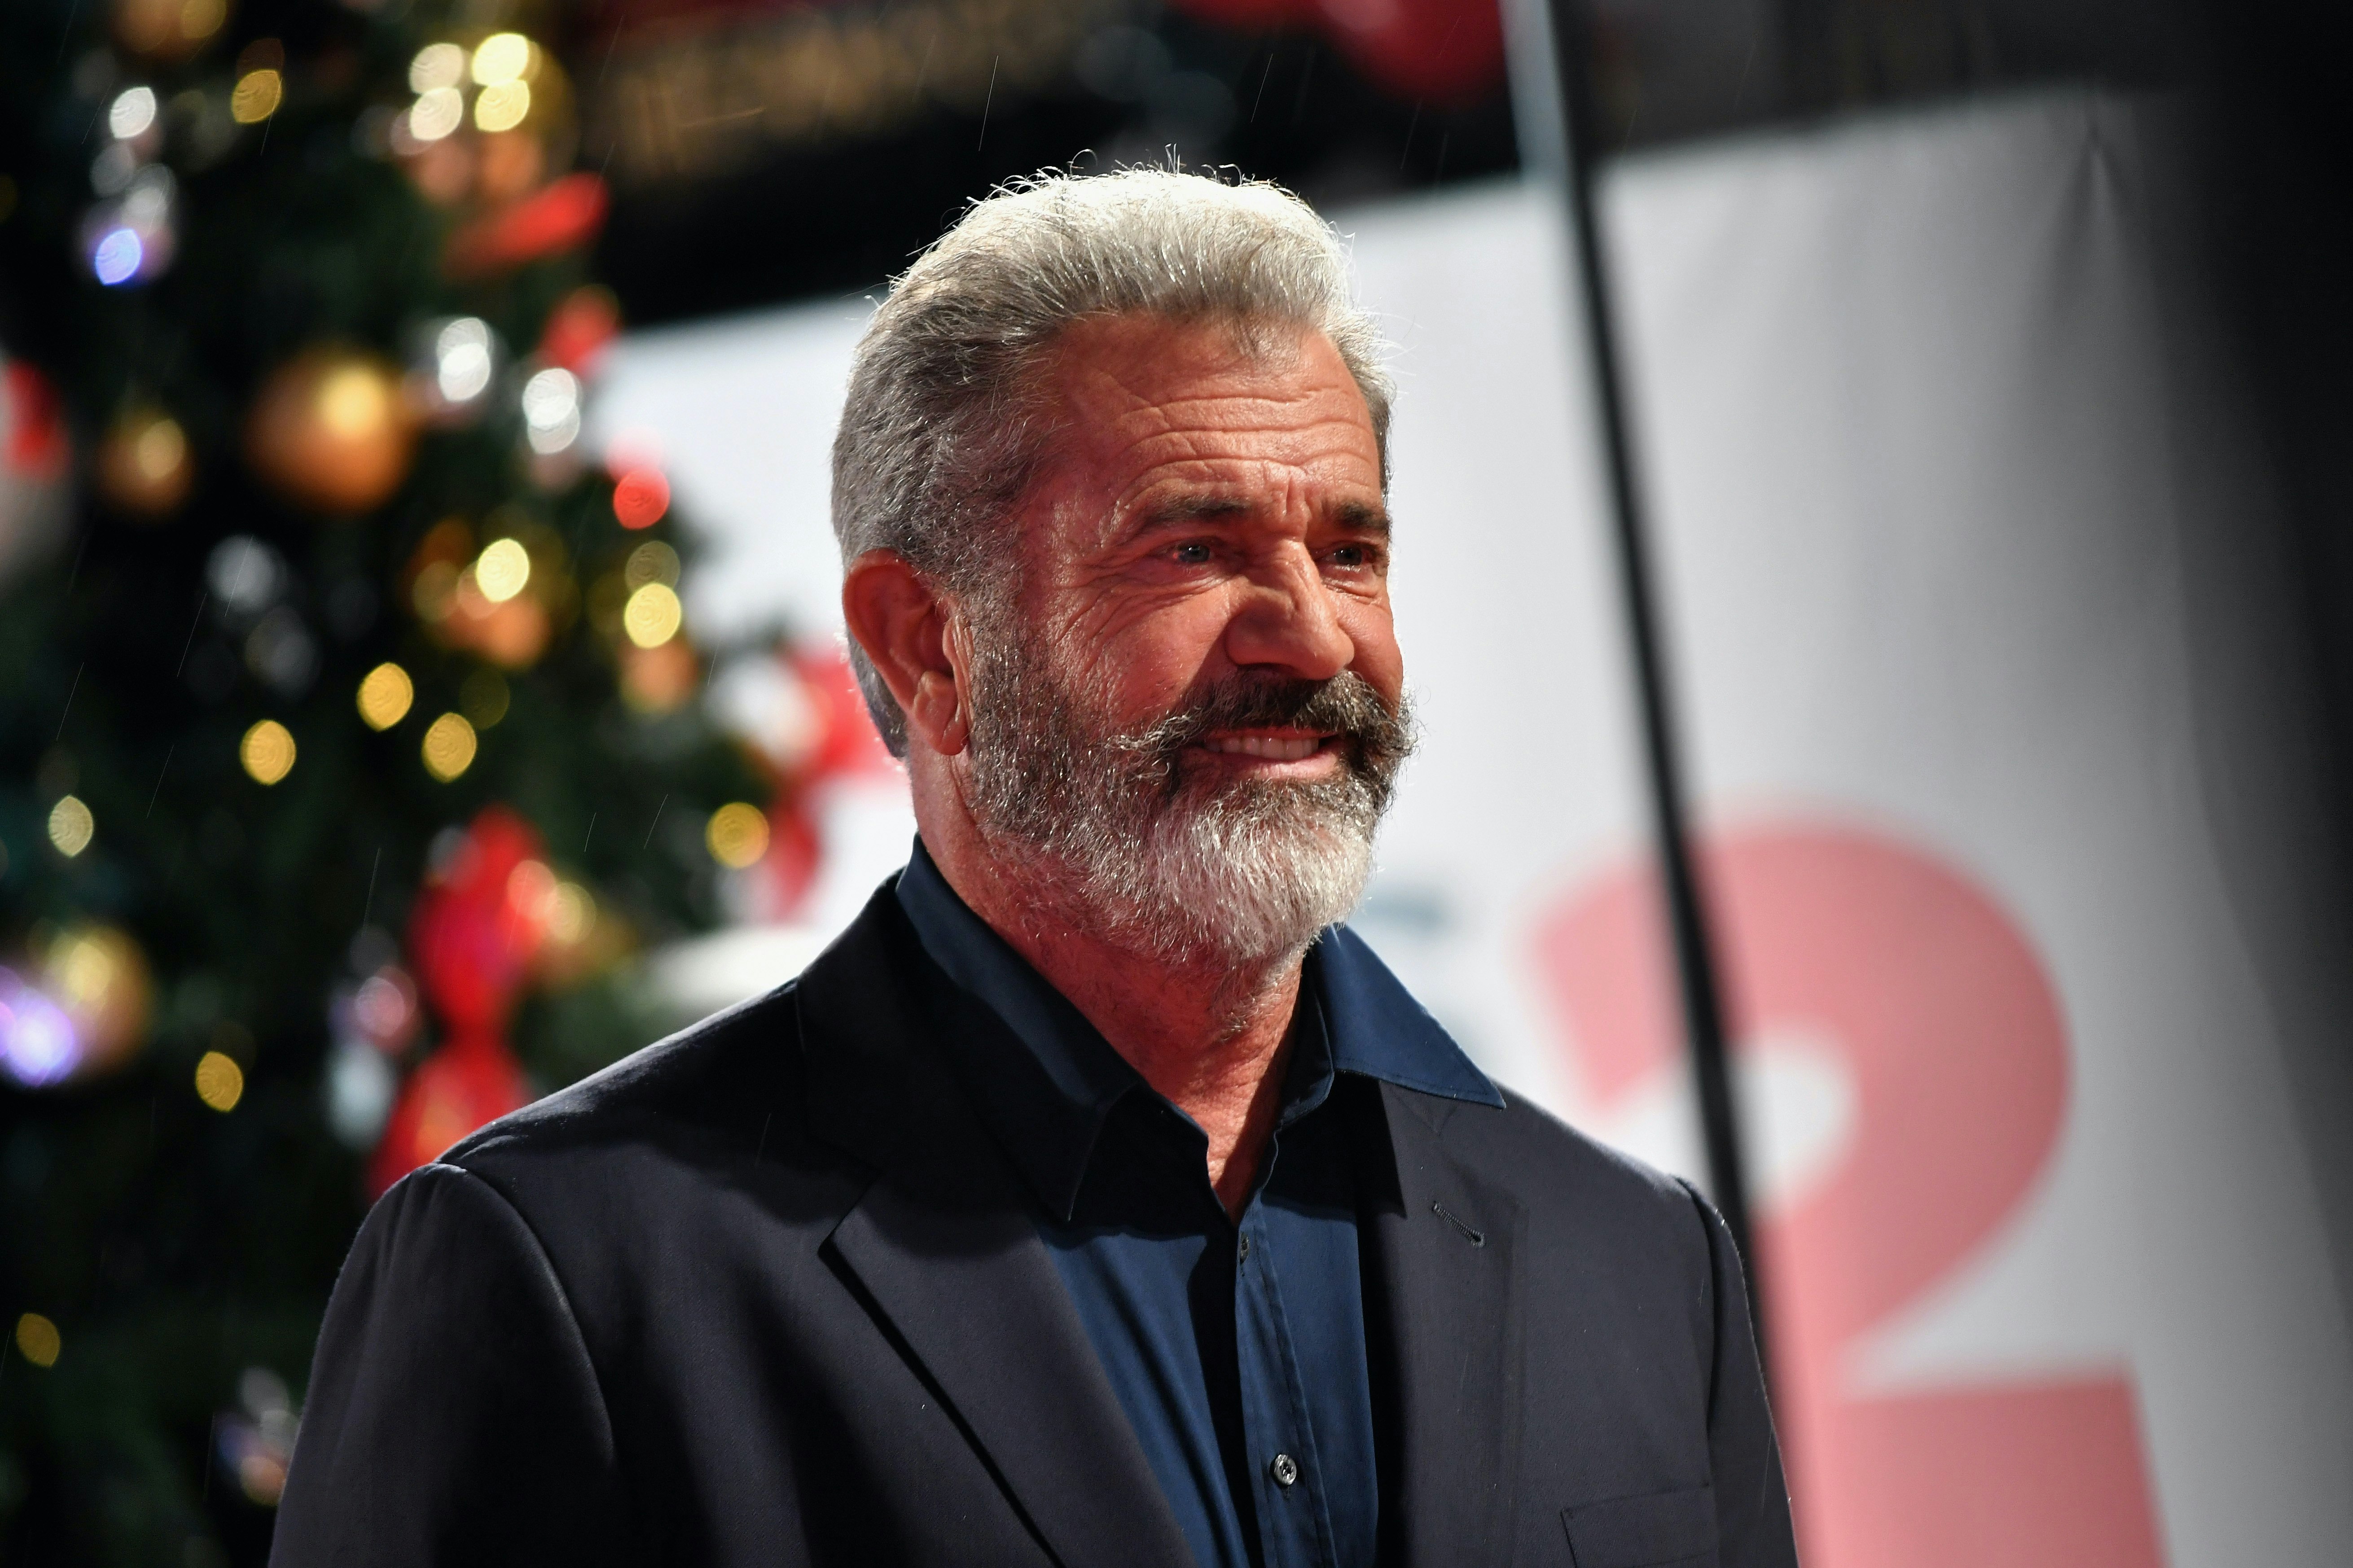 Who Is Cormac In The Continental? Mel Gibson's John Wick Prequel